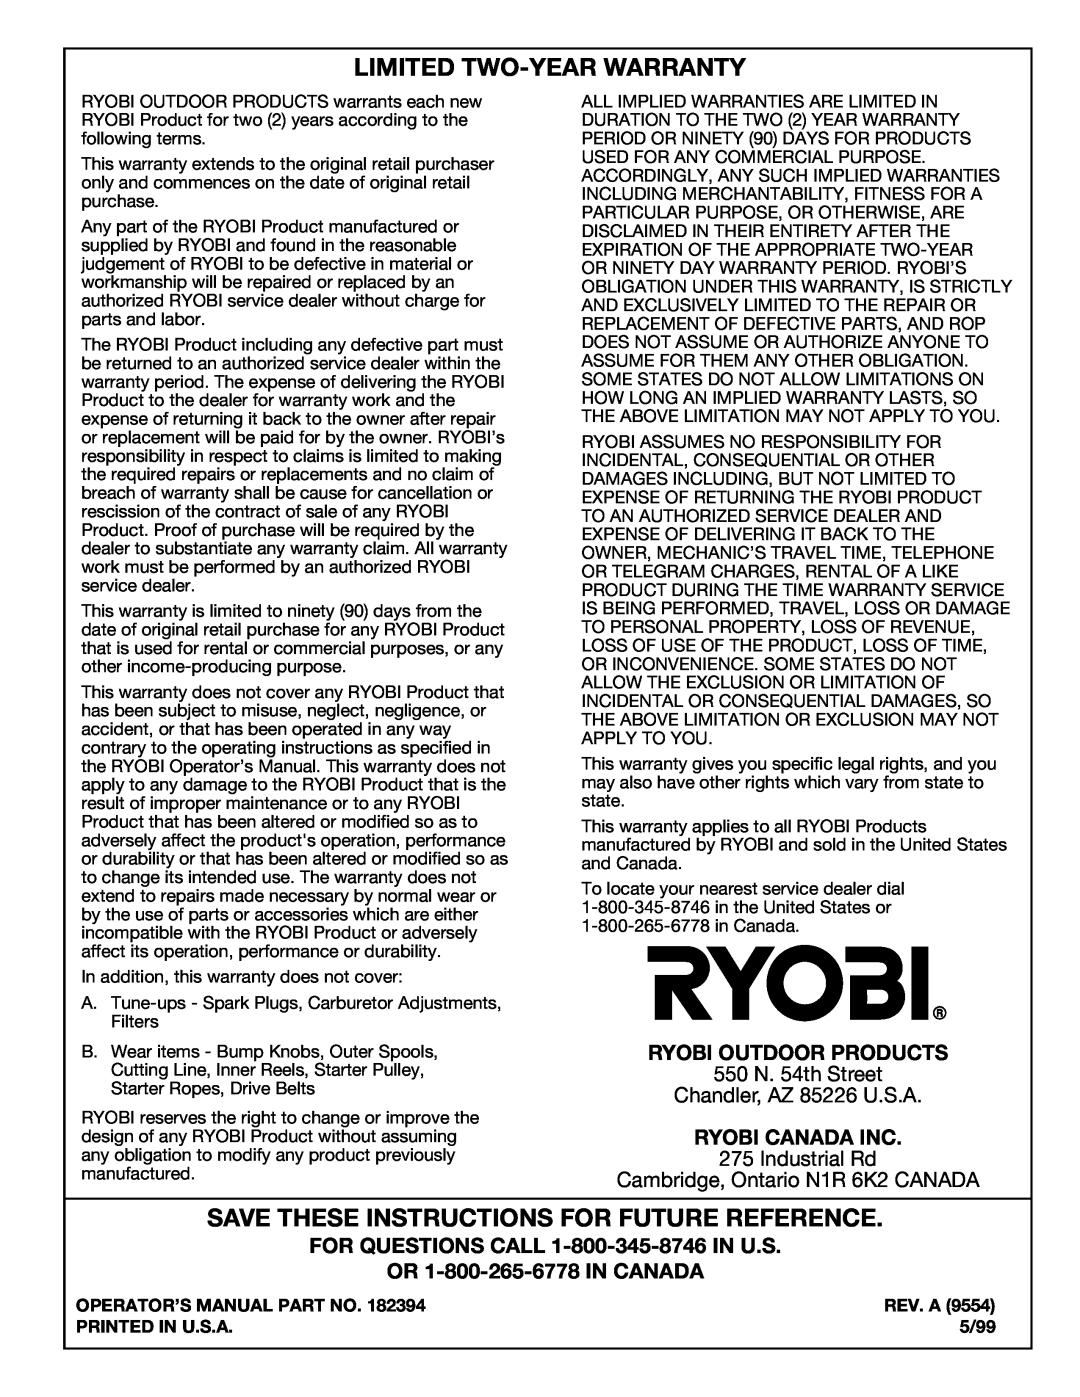 Ryobi Outdoor 875r manual Limited Two-Yearwarranty, Save These Instructions For Future Reference, Ryobi Outdoor Products 